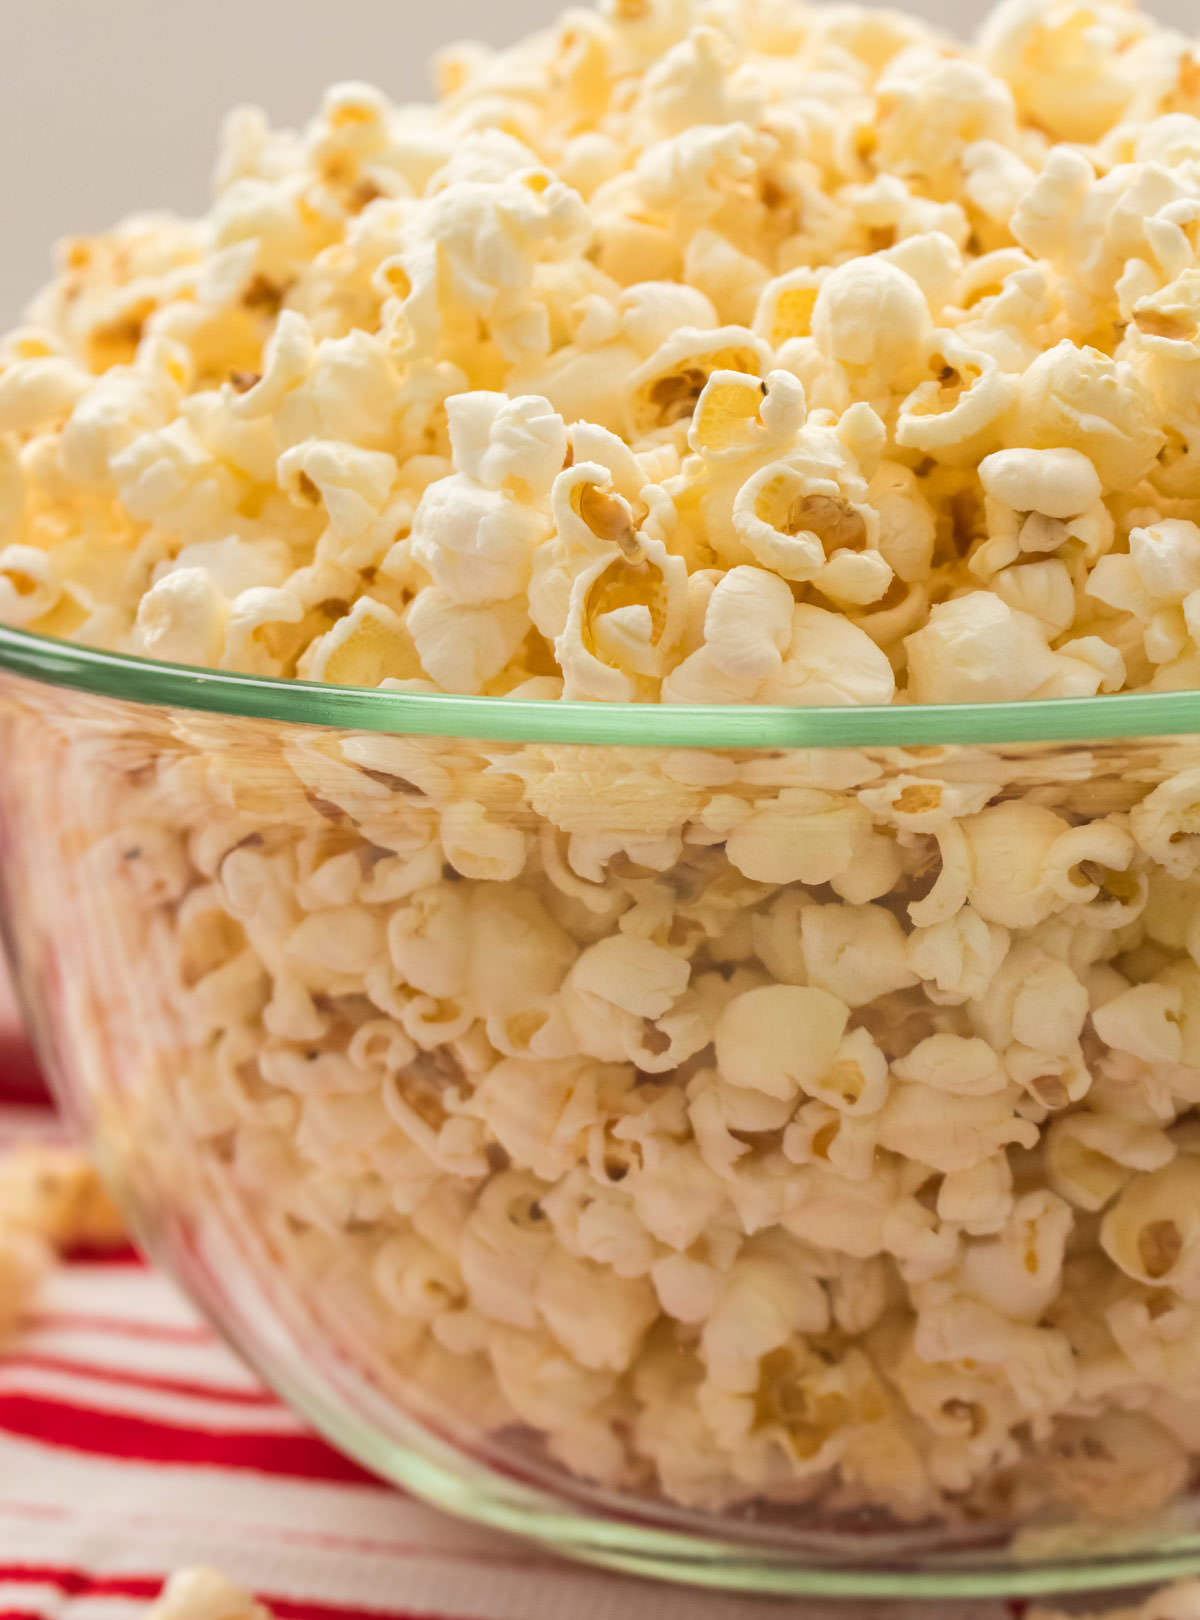 Closeup on a glass serving bowl filled with popcorn made on a stovetop sitting on a red and white table linen.